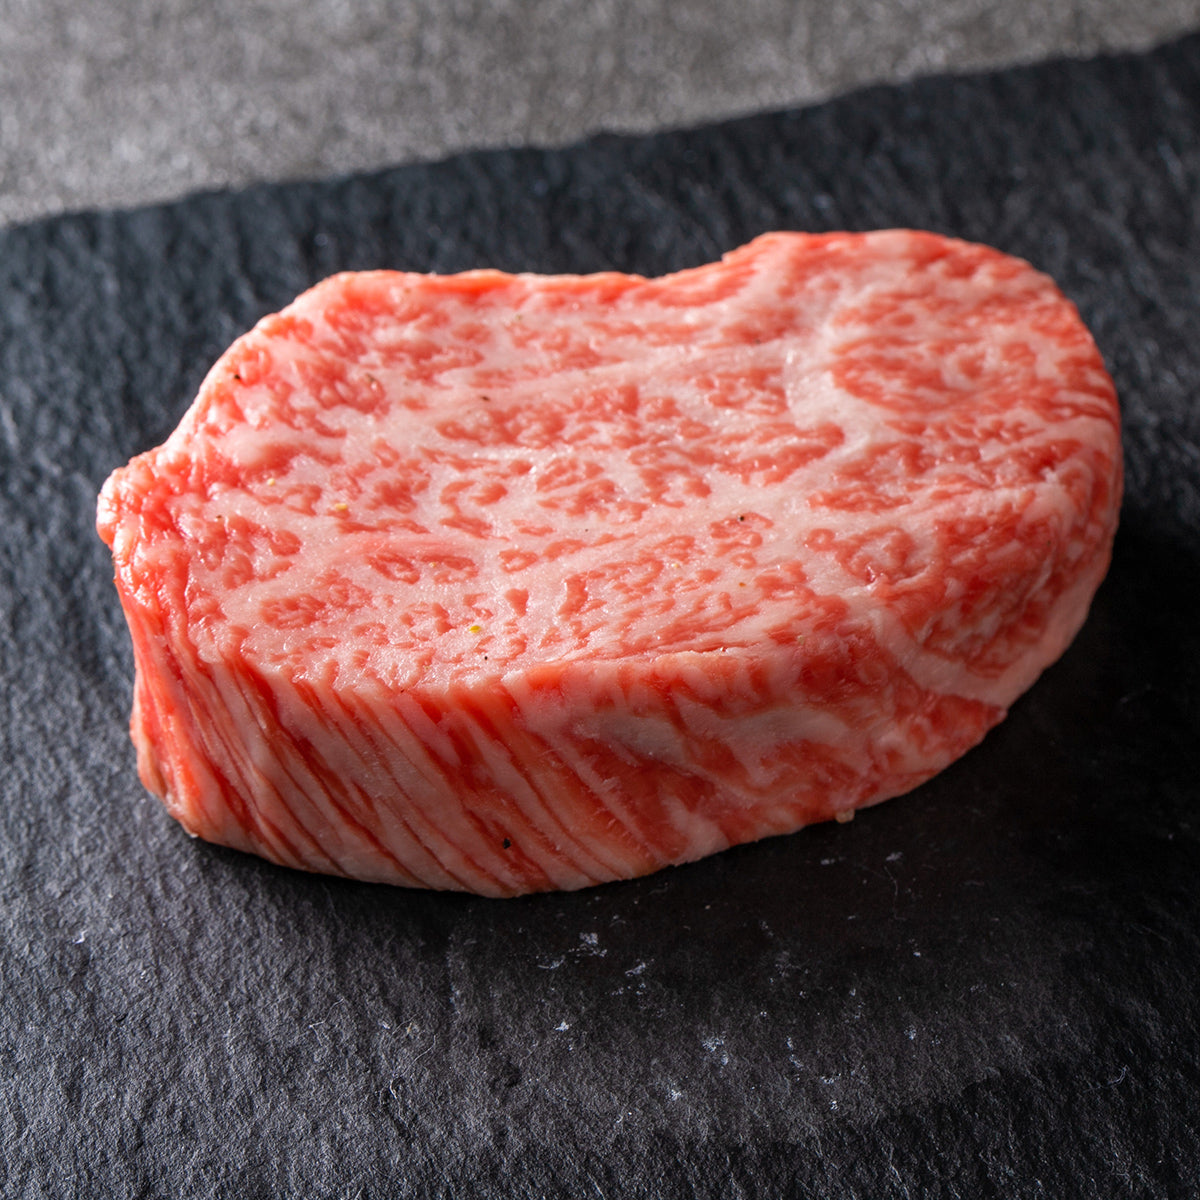 This A5 Wagyu 6oz tenderloin filet is marbled beautifully and cuts like butter, it is from the Suekichi Genki Farm in Miyazaki, Japan. We hand select each loin prior to purchase to ensure that we offer nothing but the finest Wagyu on the Market.   A5 Wagyu beef from Miyazaki prefecture is among the finest and most luxurious brands of beef in the world. A highly sought-after selection of A5 Japanese Miyazaki Wagyu is Miyazakigyu, which is world-renowned for its intricate, snowflake-like marbling. 